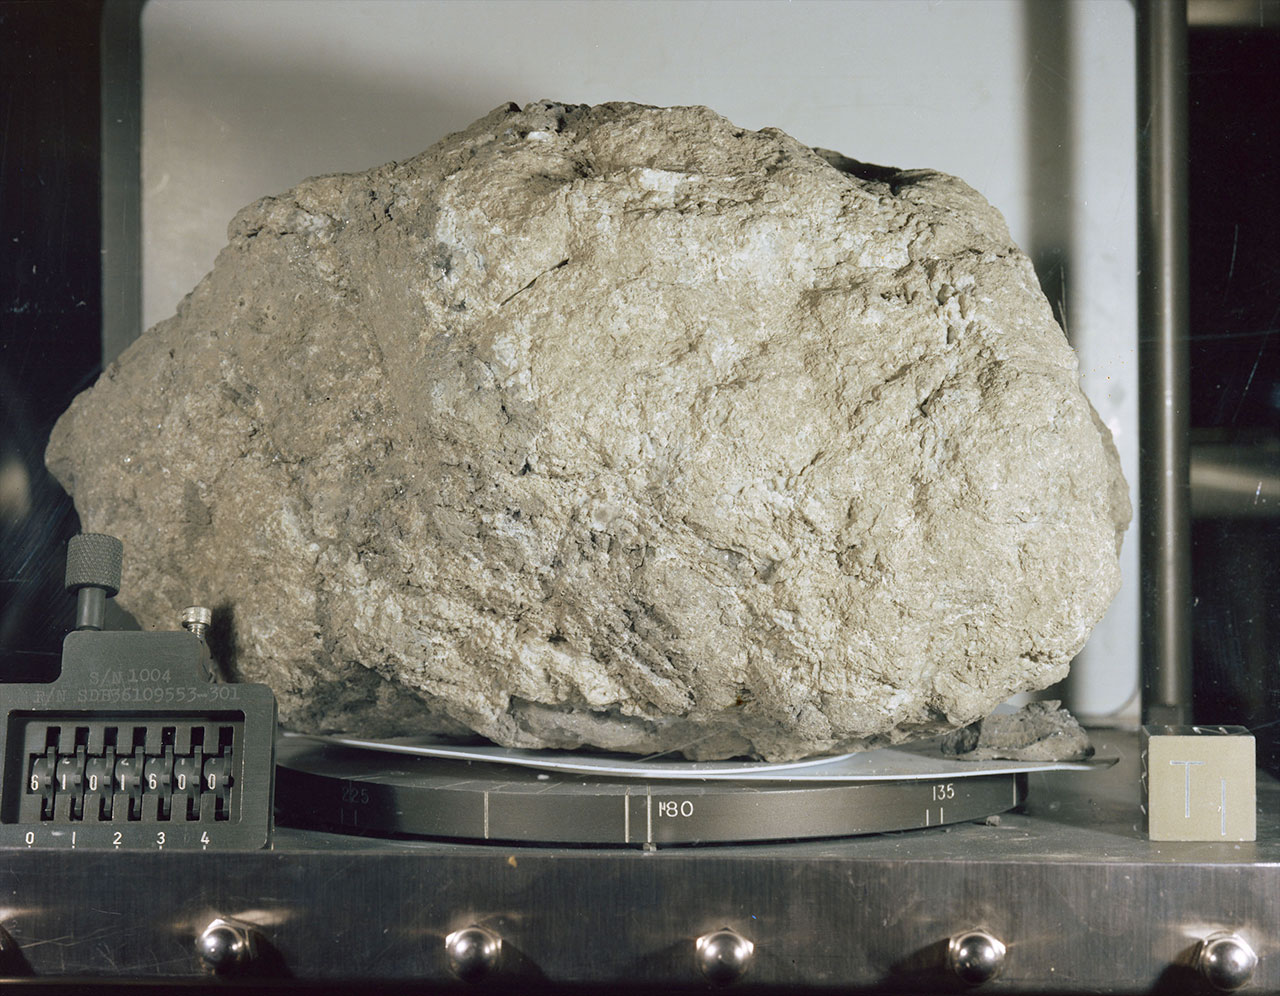 "Big Muley," named for Bill Muehlberger, Apollo 16's field geology team leader, was the largest moon rock returned to Earth by the six Apollo lunar landing missions between 1969 and 1972.